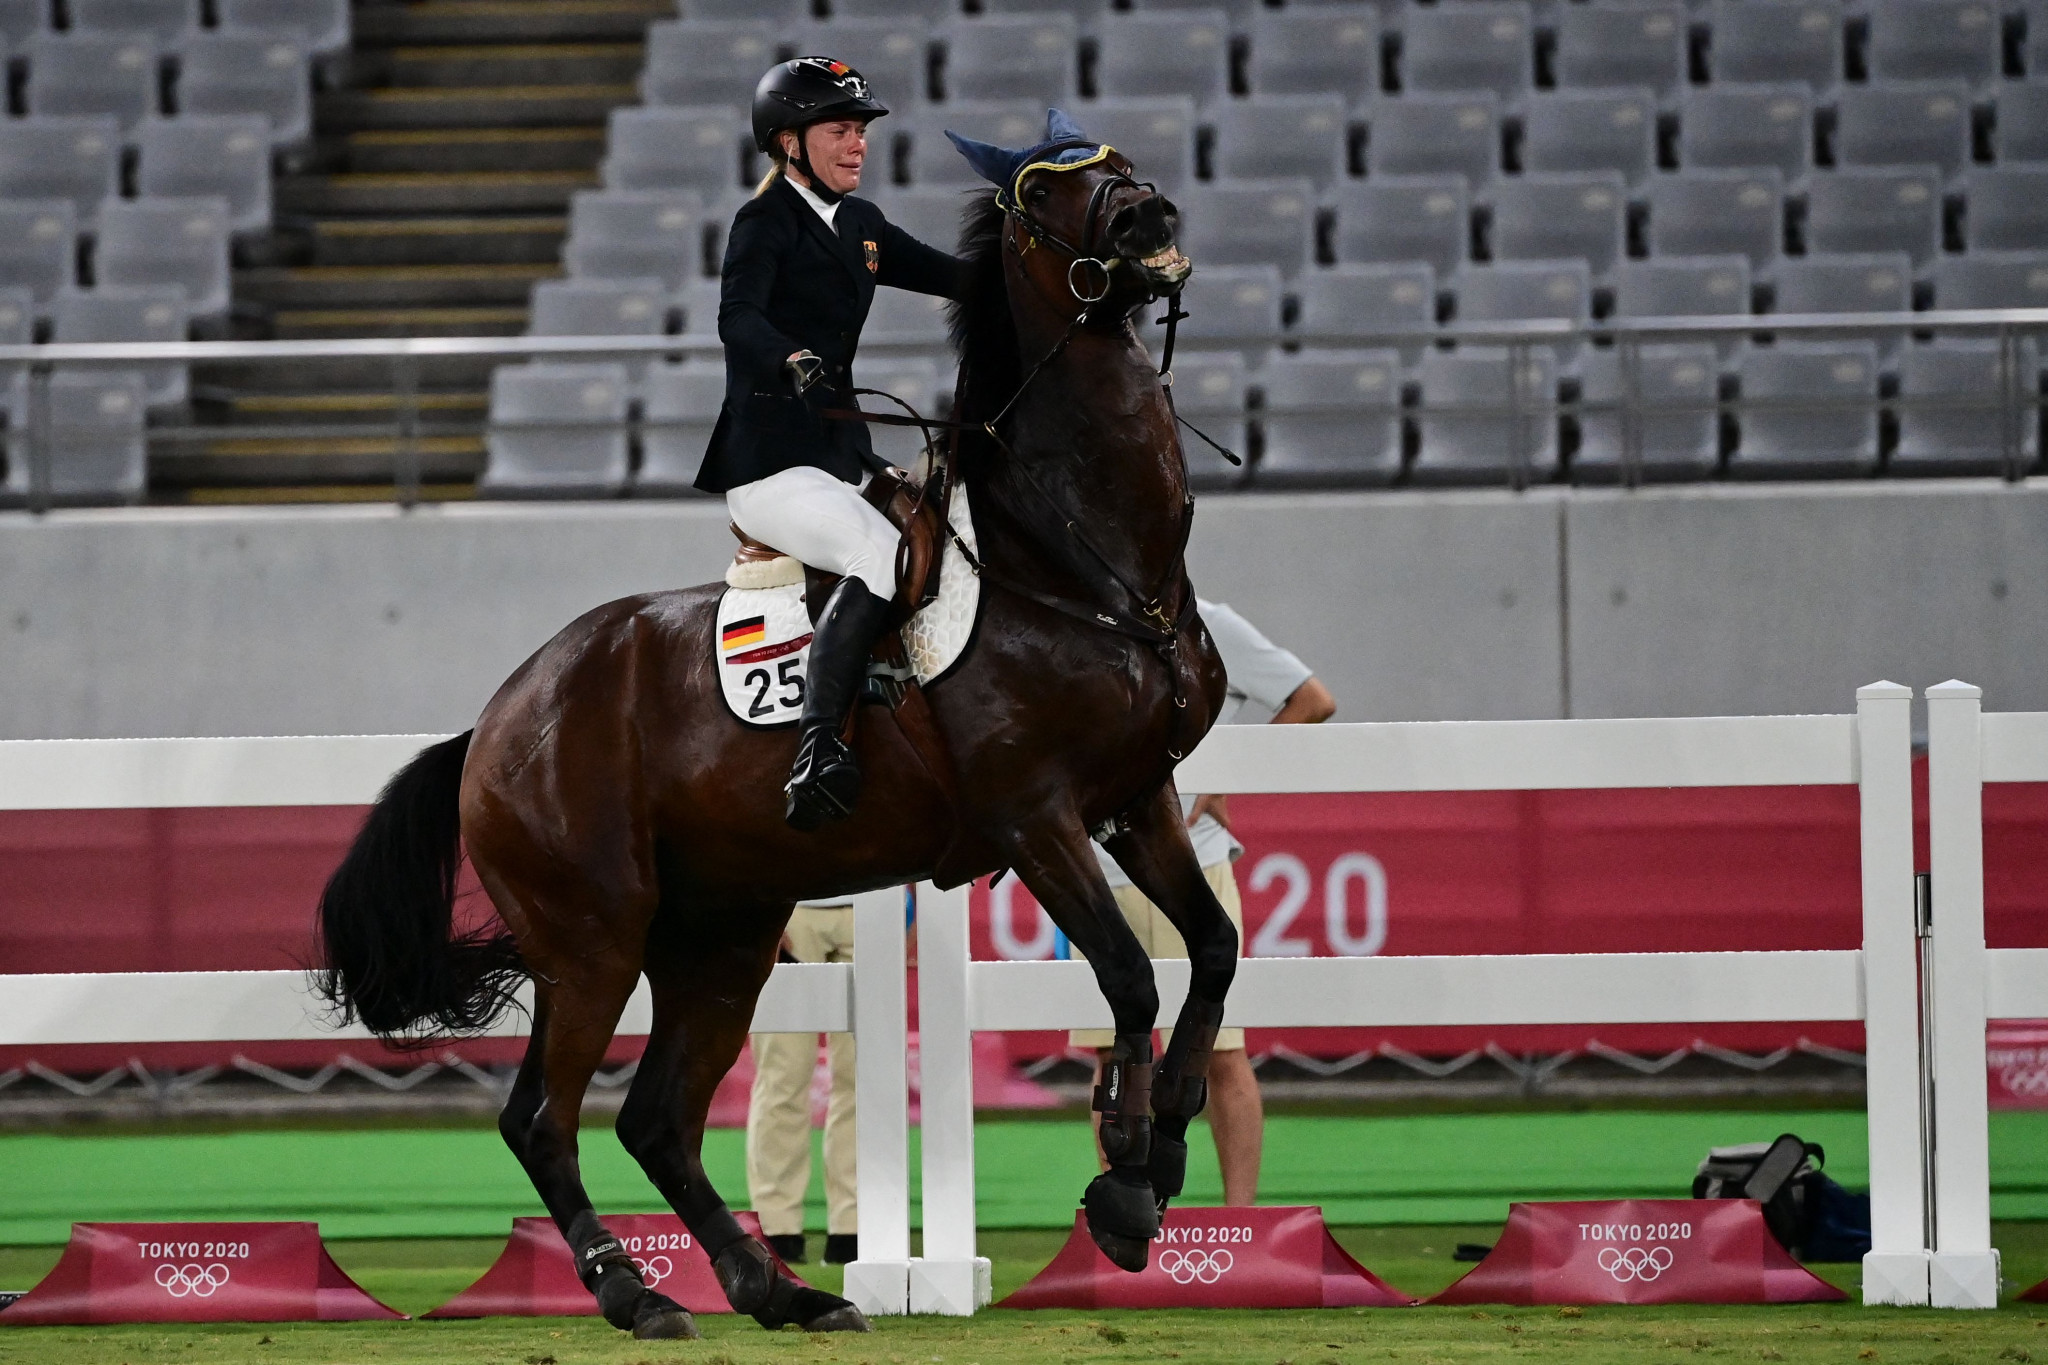 Saint Boy refused to jump in the riding event of the modern pentathlon, with German coach Kim Raisner disqualified after appearing to strike the horse ©Getty Images